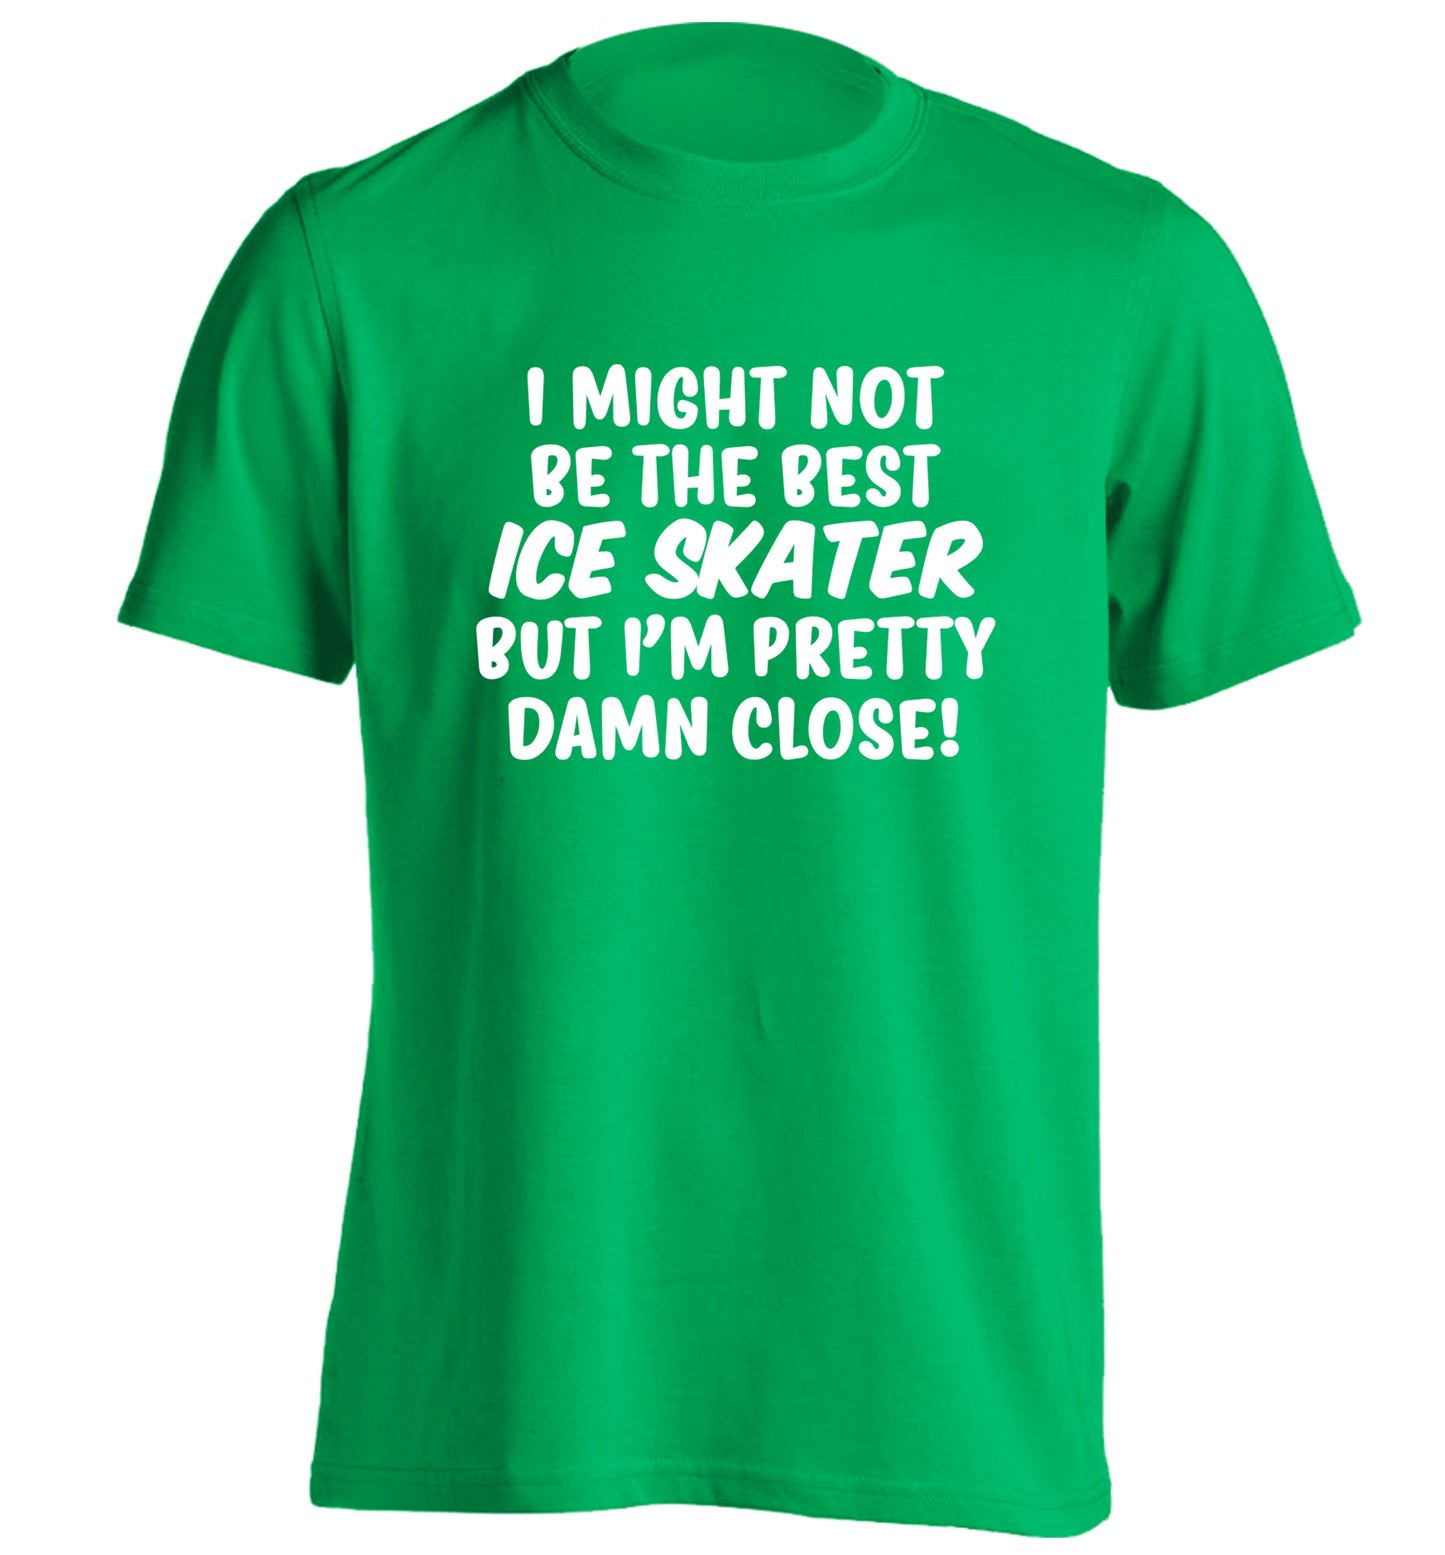 I might not be the best ice skater but I'm pretty damn close! adults unisexgreen Tshirt 2XL